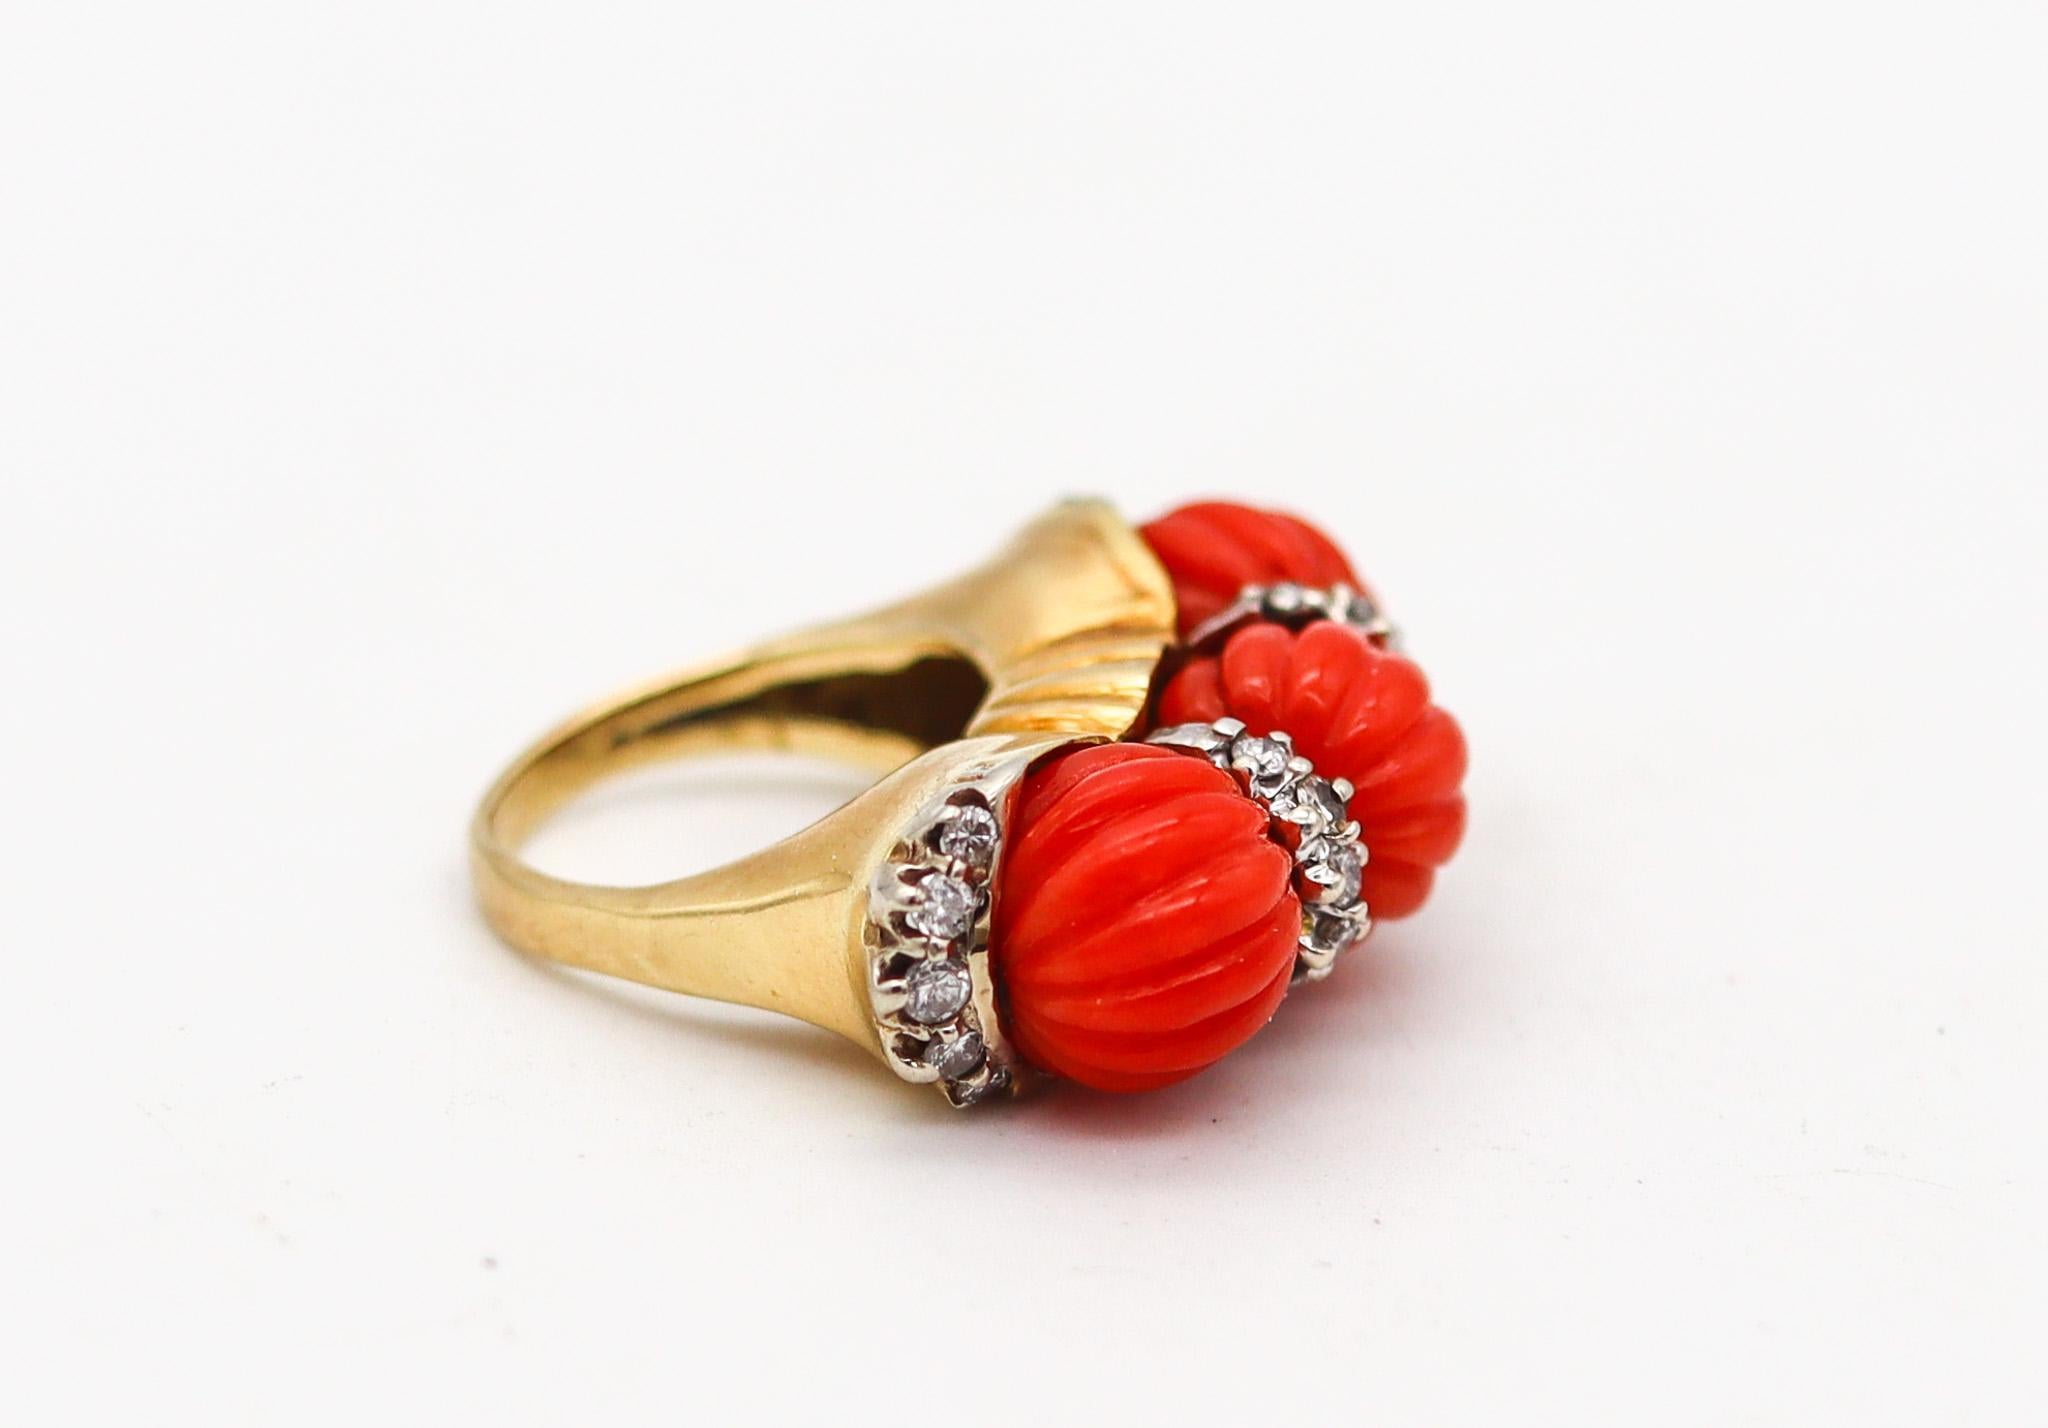 Modernist Francesco Passaretta 1970 Fluted Sardinian Coral Ring In 18Kt Gold With Diamonds For Sale